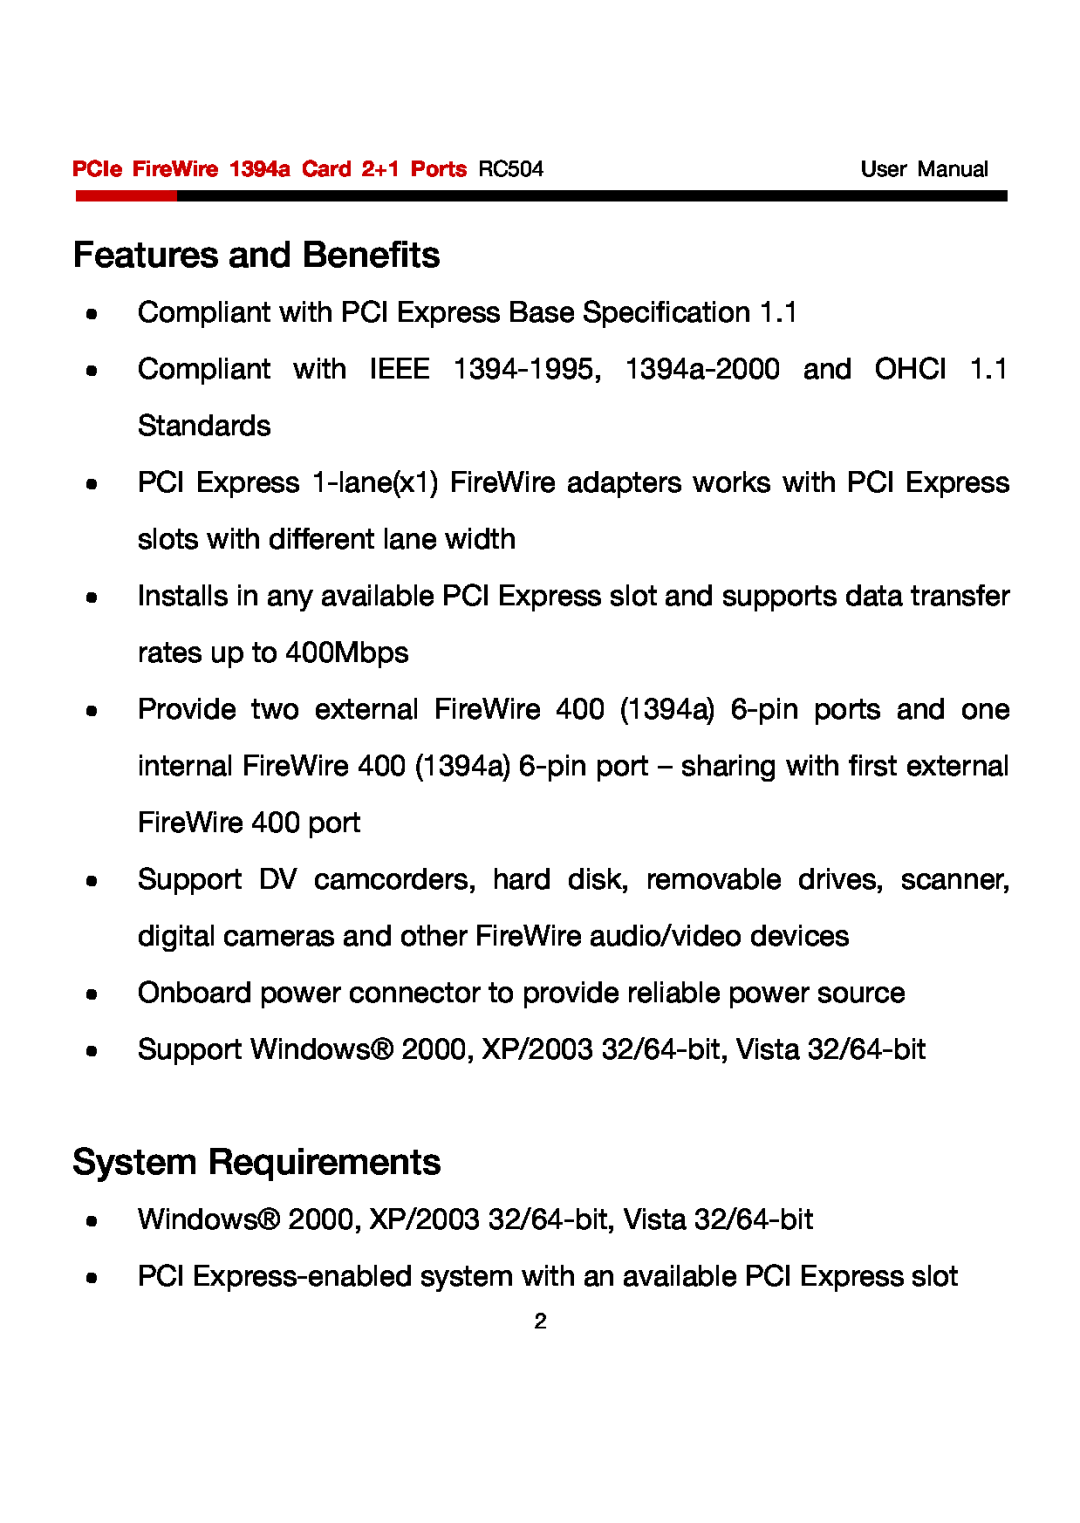 Rosewill RC504 user manual Features and Benefits, System Requirements 